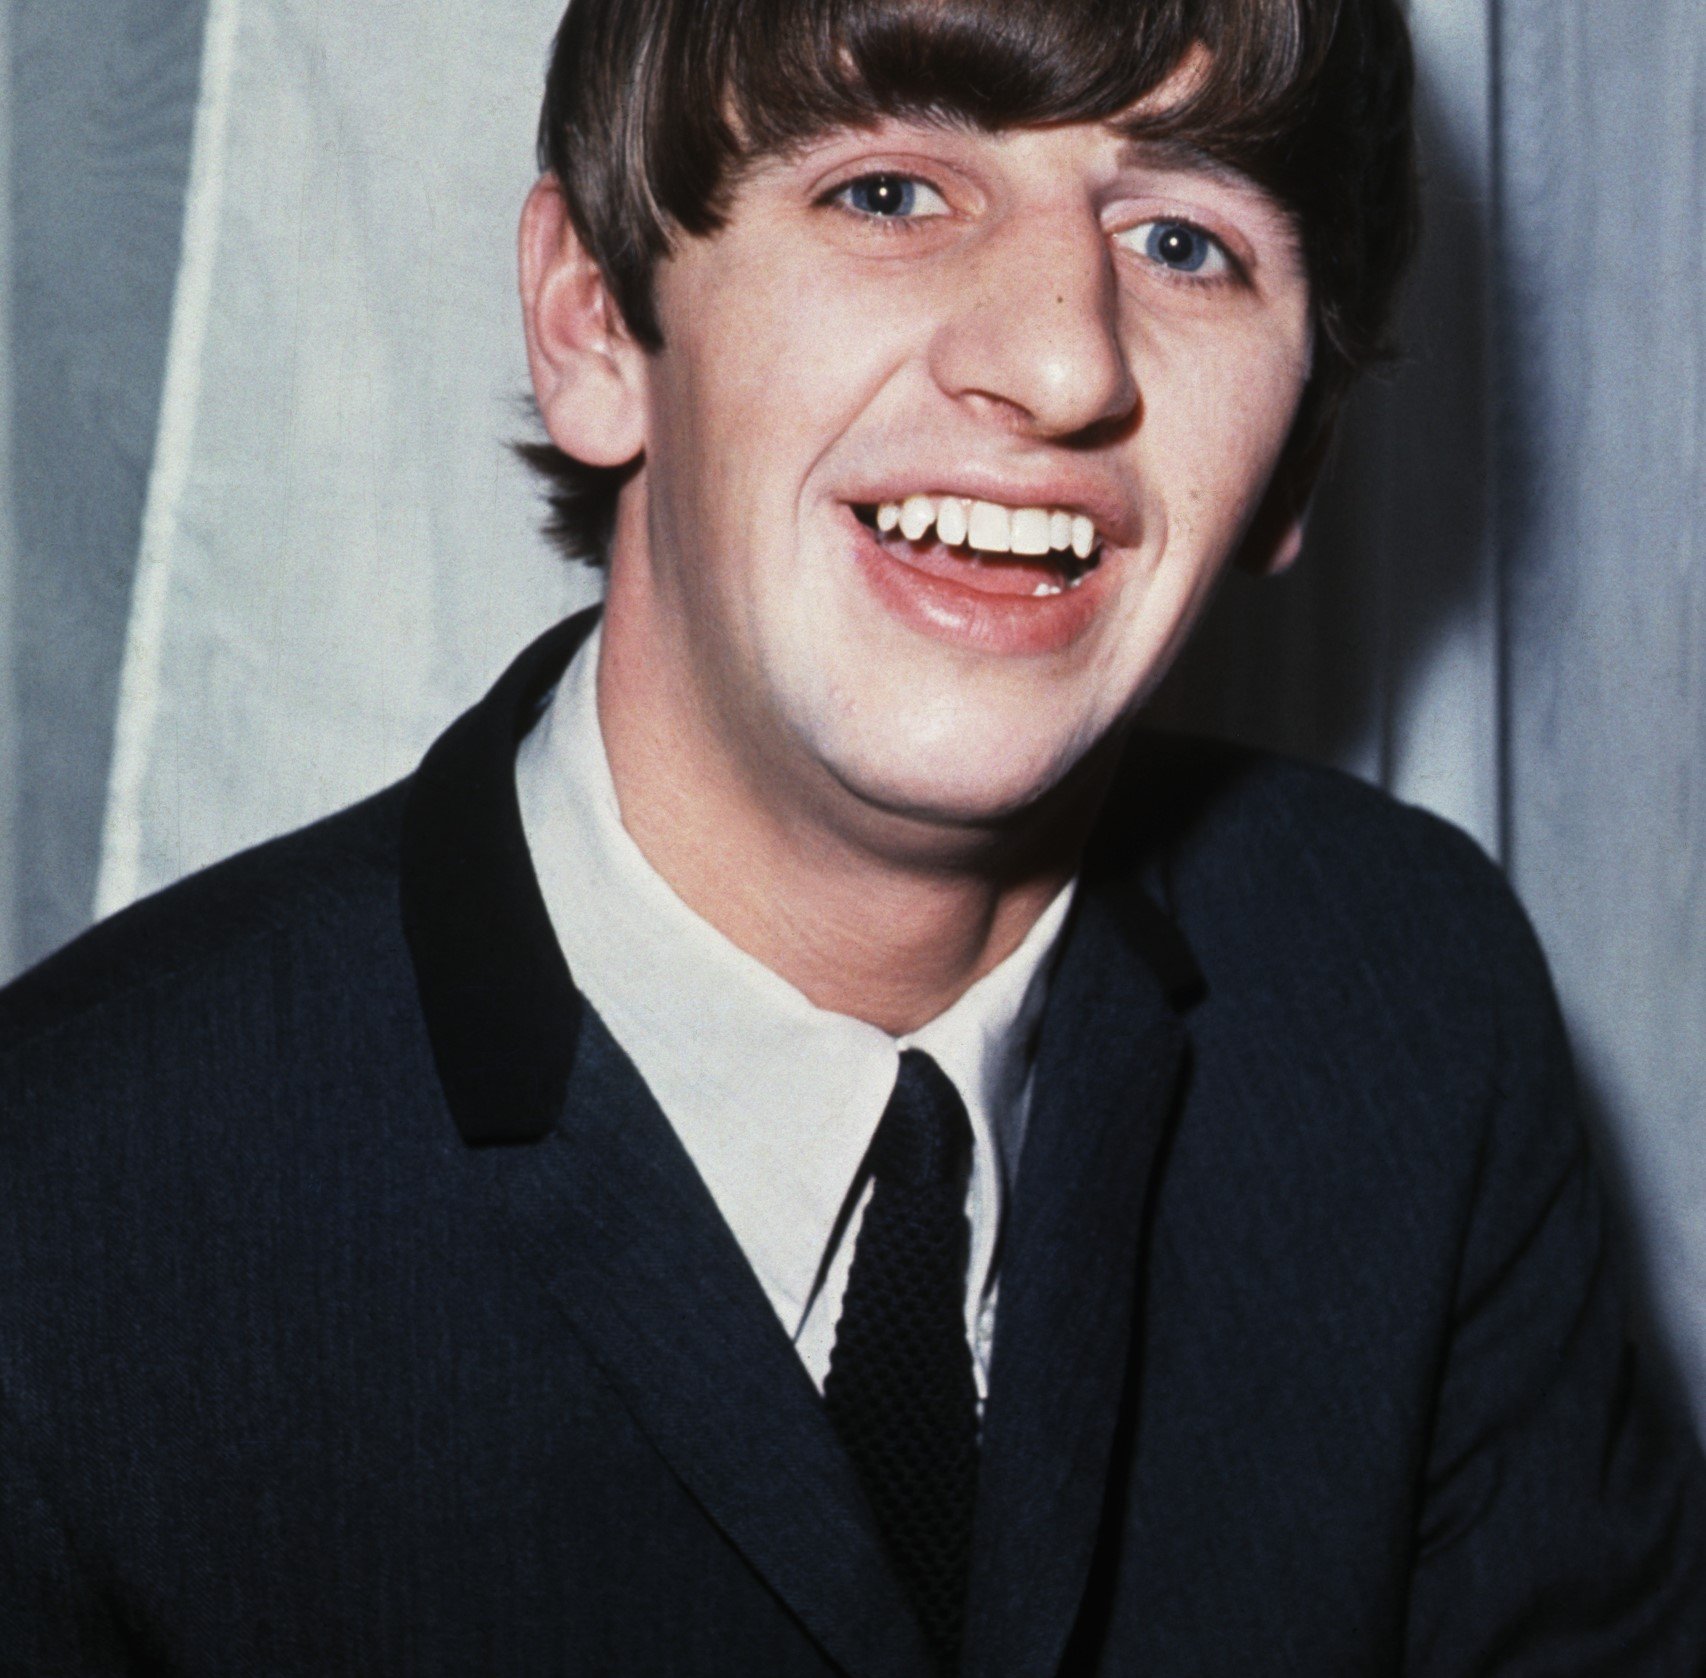 The Beatles' Ringo Starr wearing a black suit